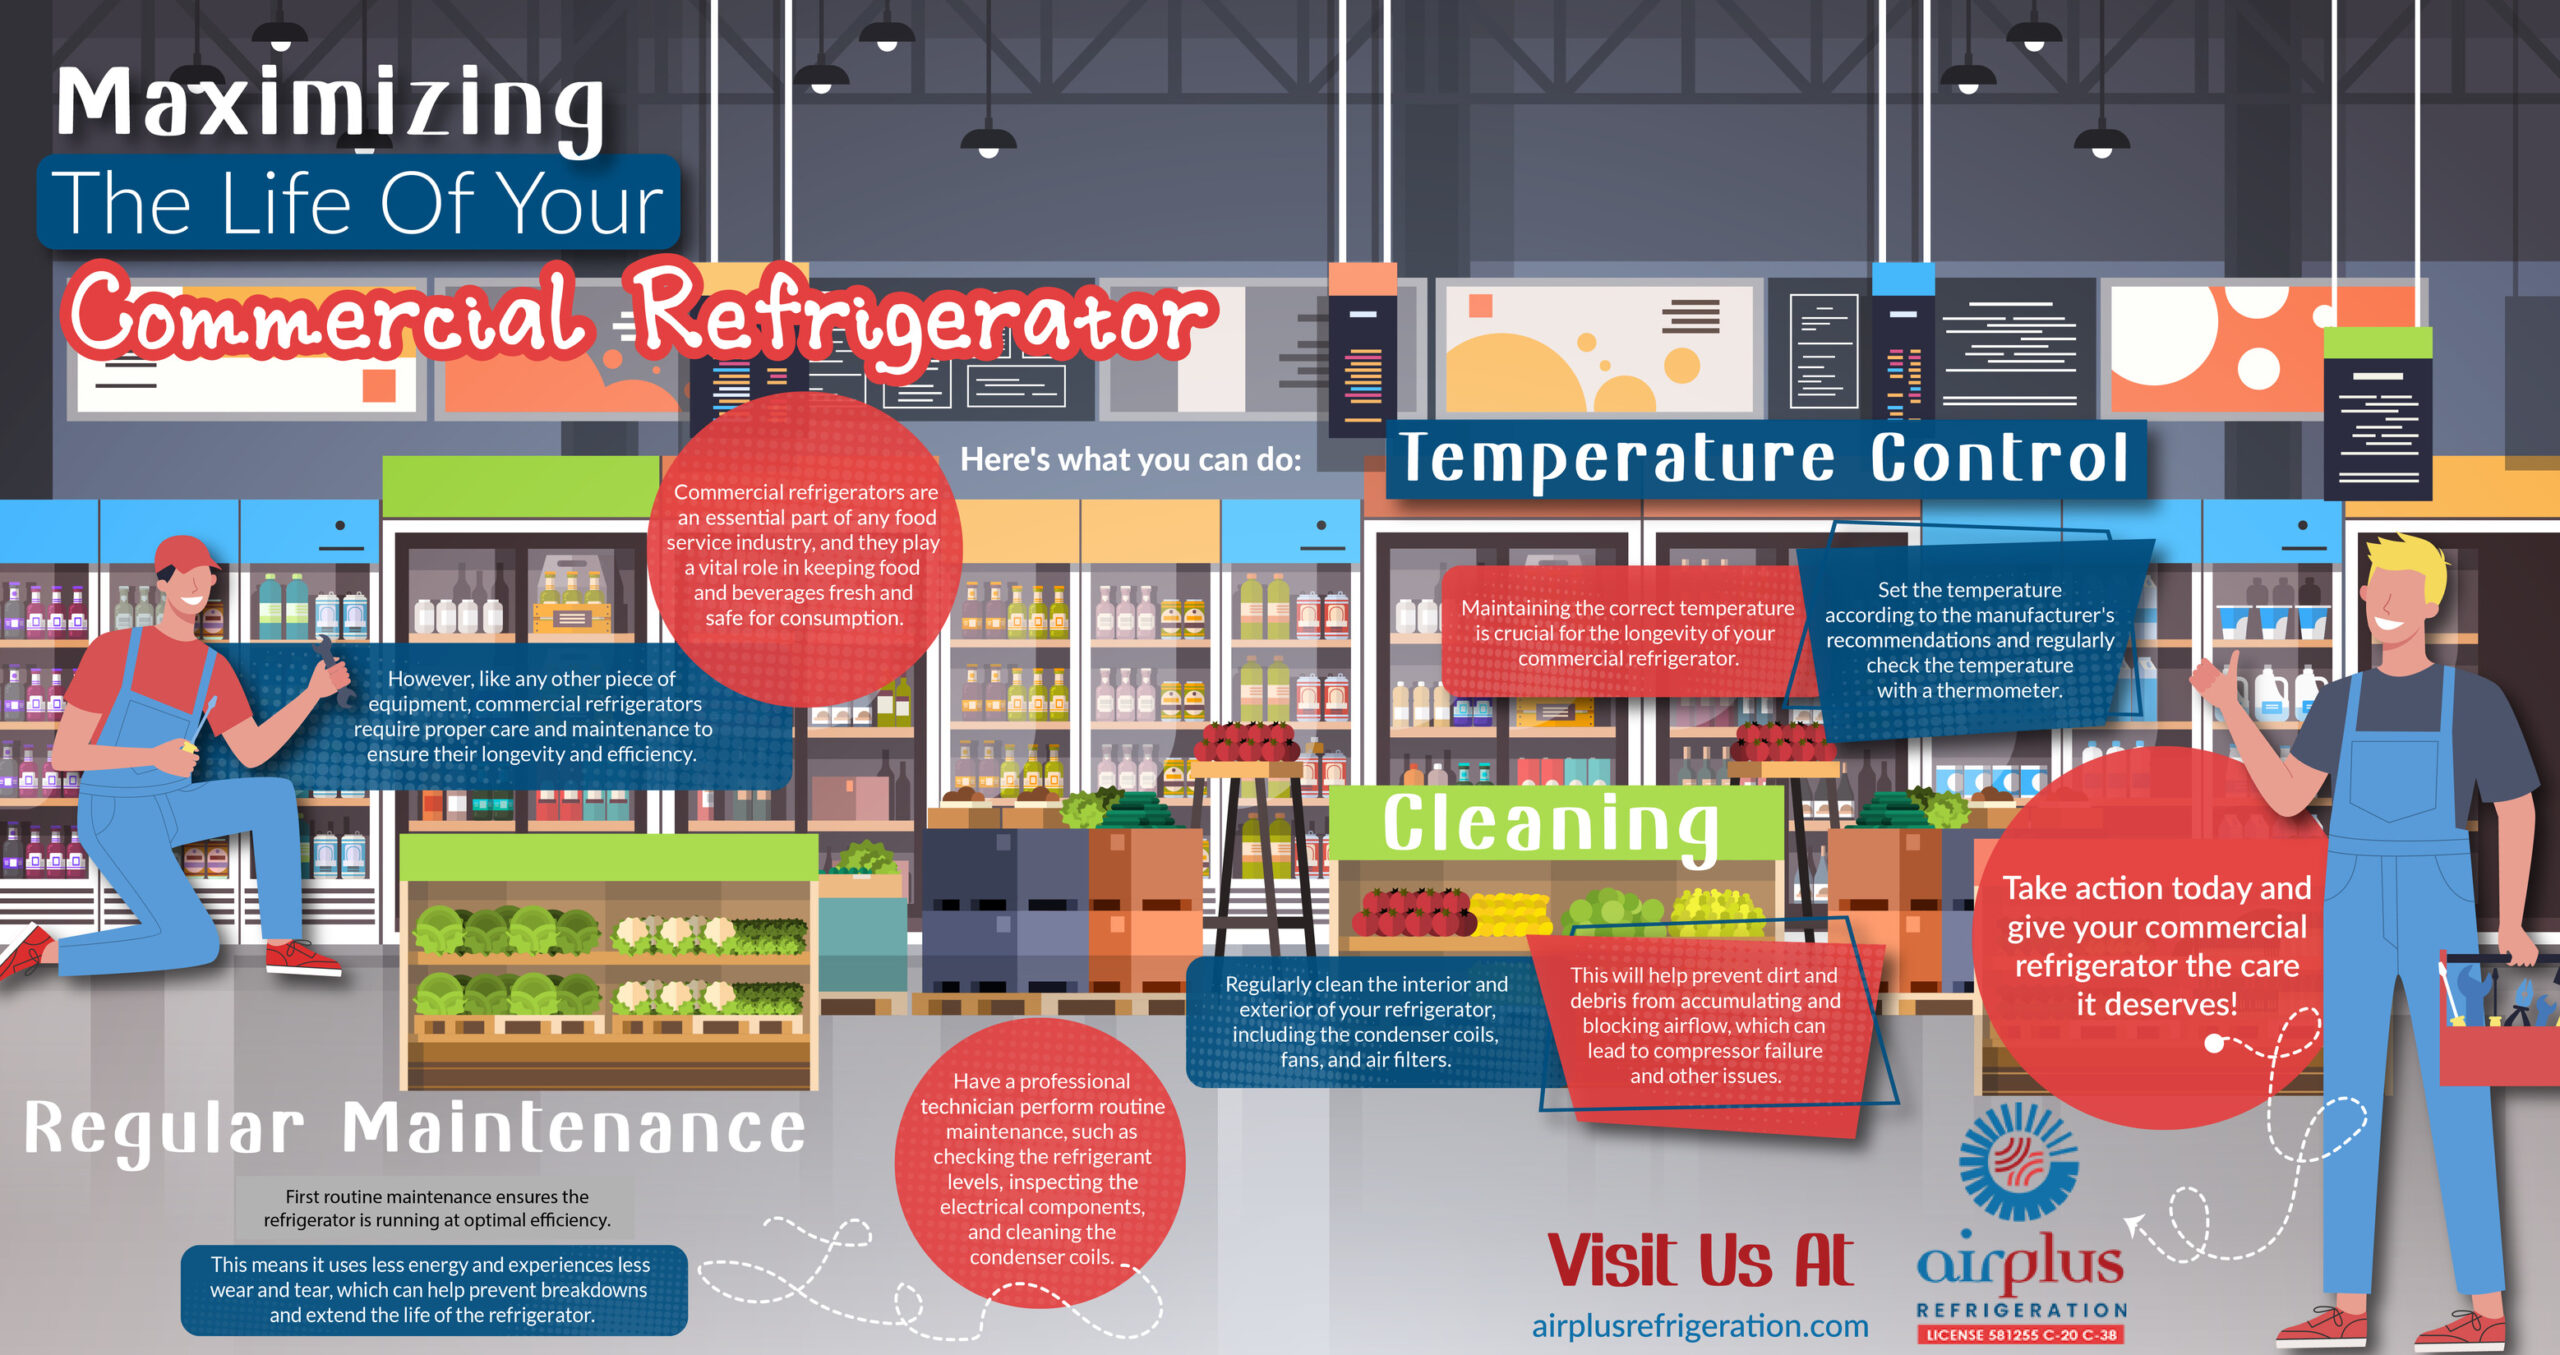 Maximizing the Life of Your Commercial Refrigerator